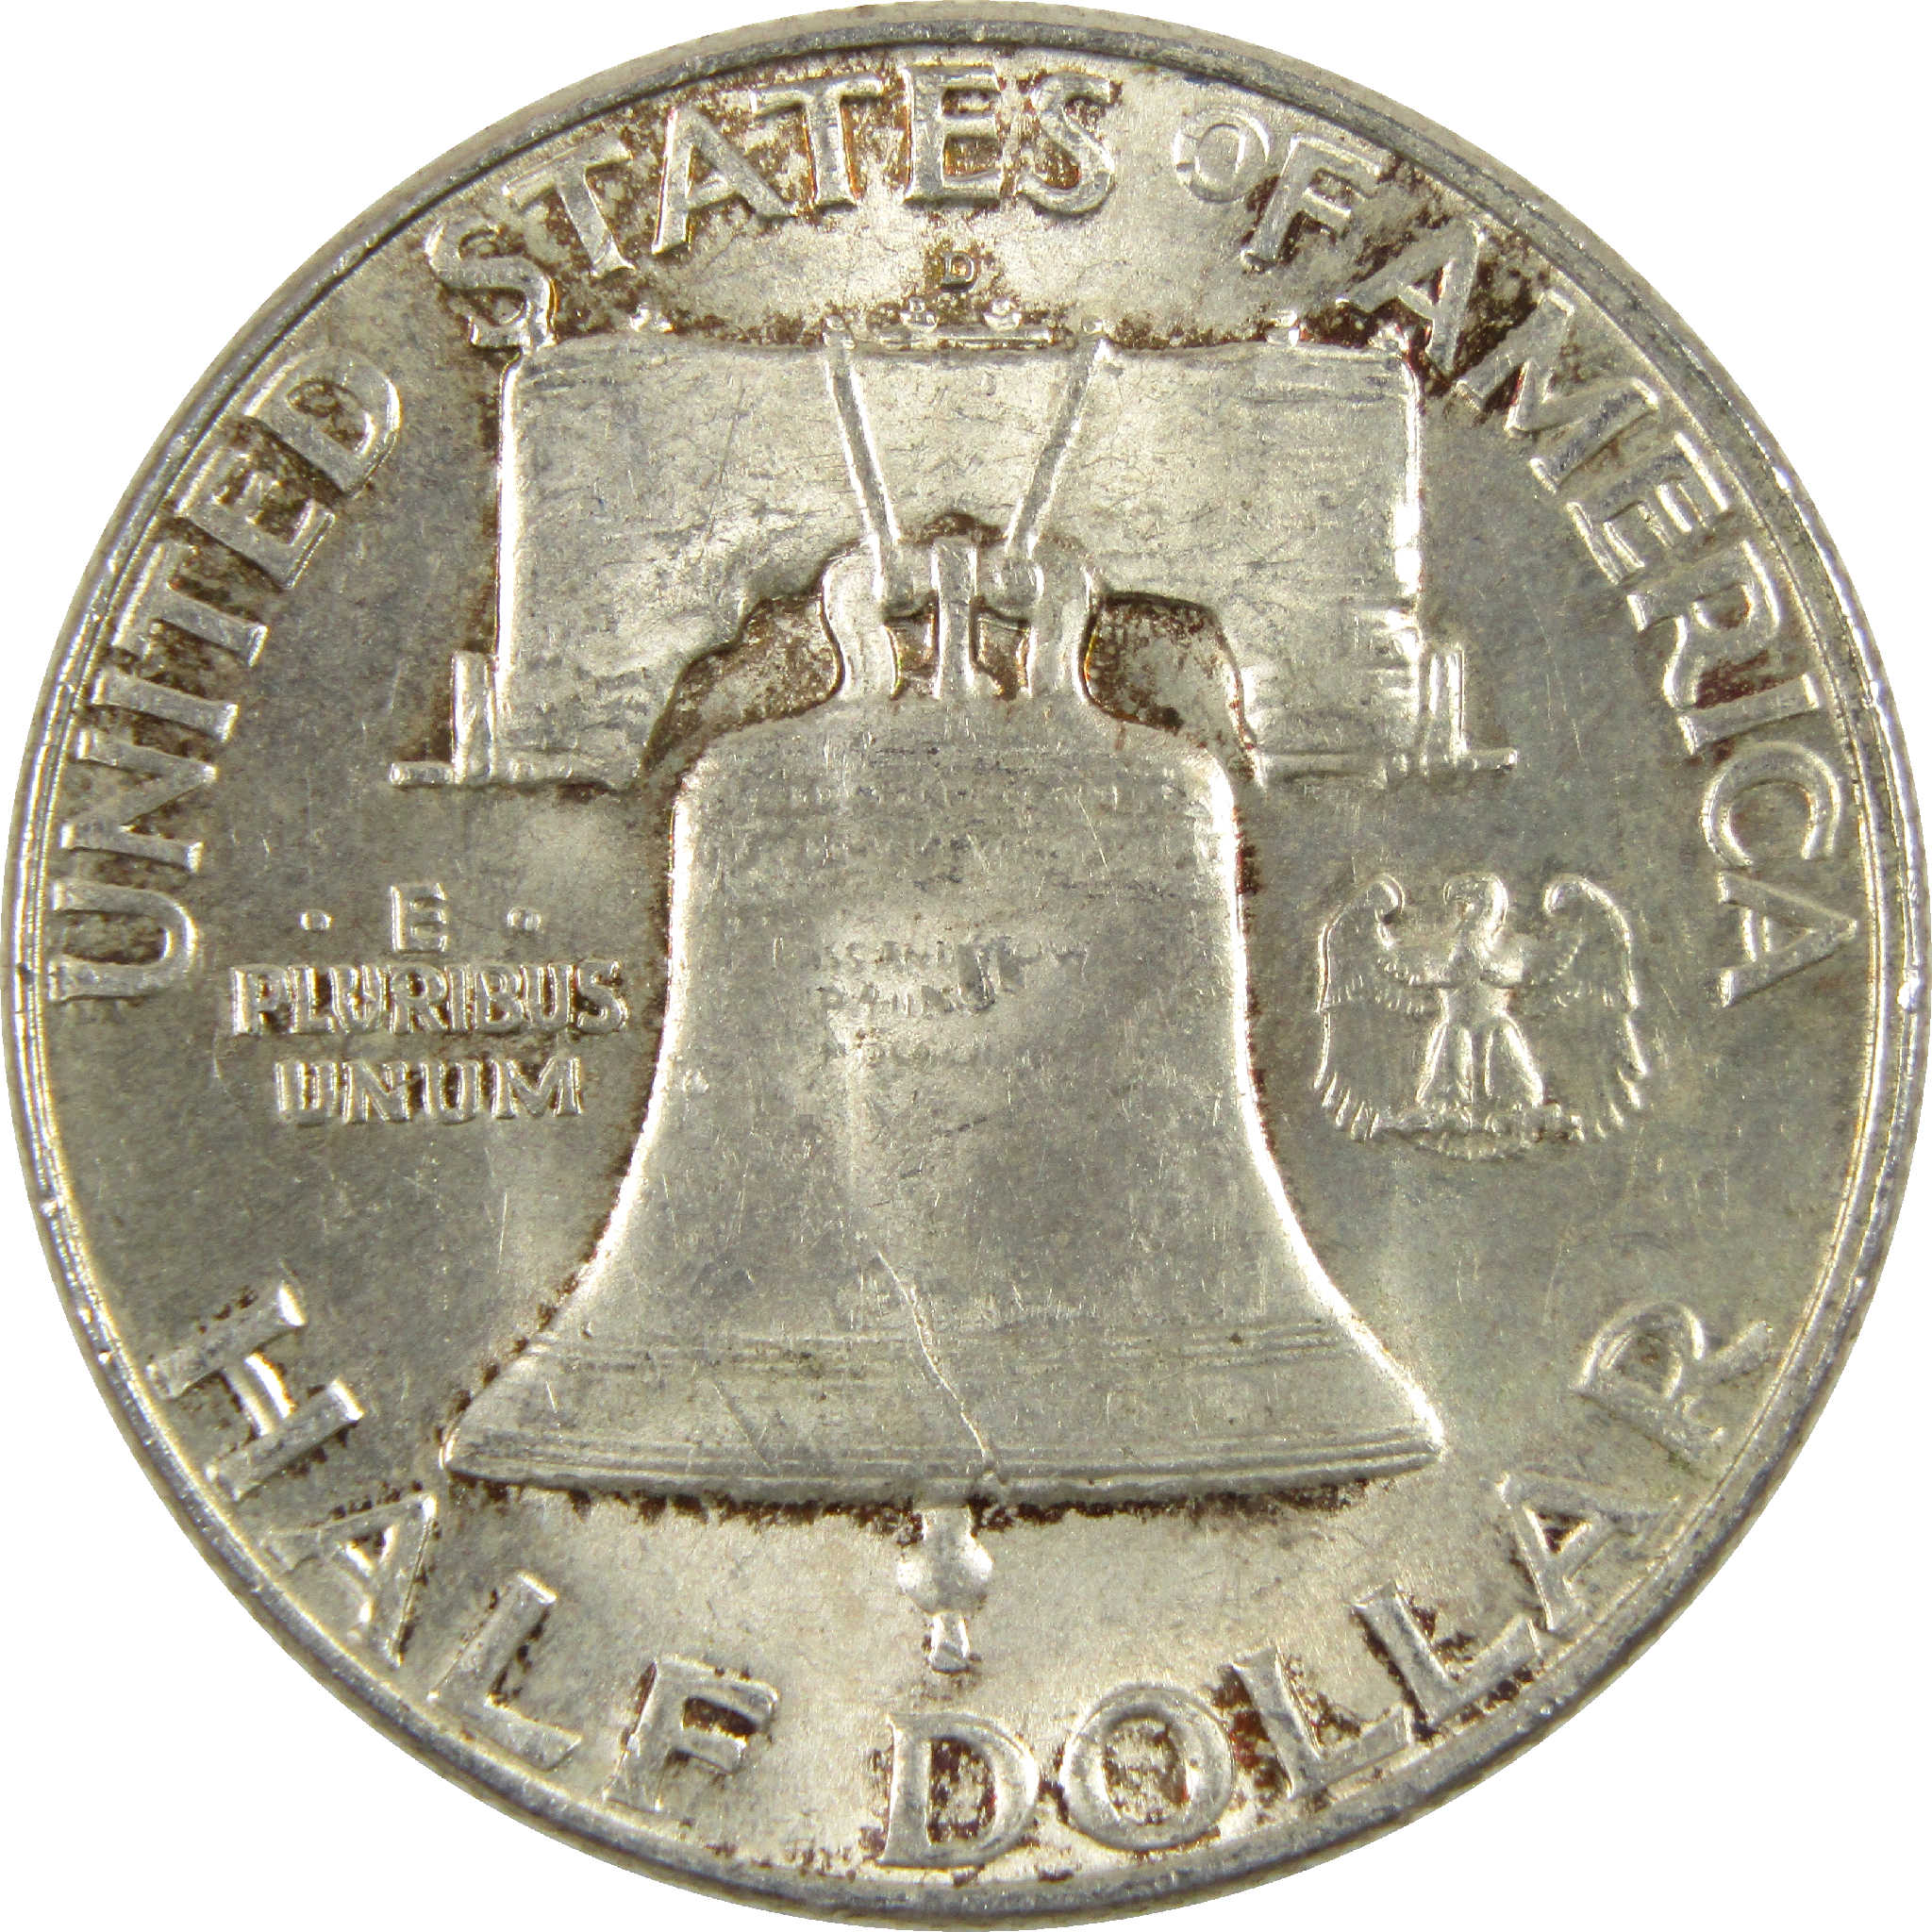 1954 D Franklin Half Dollar AU About Uncirculated Silver 50c Coin